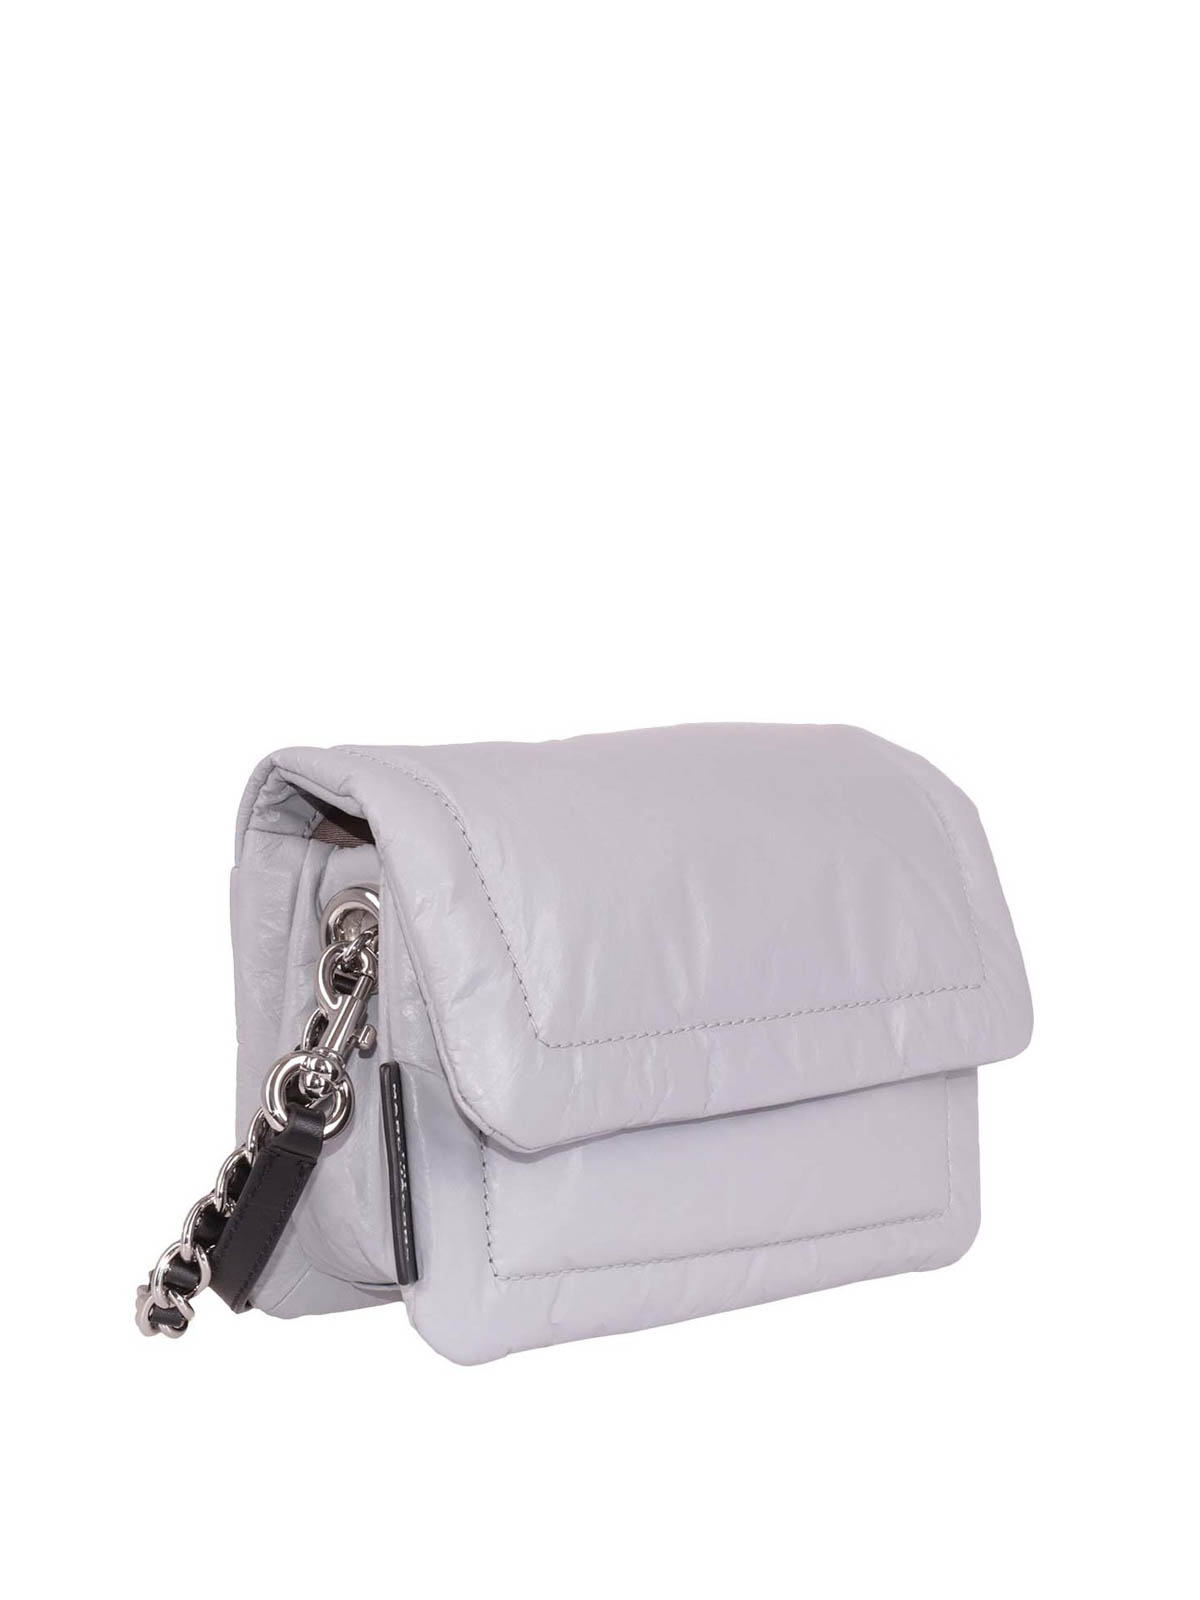 MARC JACOBS THE PILLOW BAGショルダーバッグ